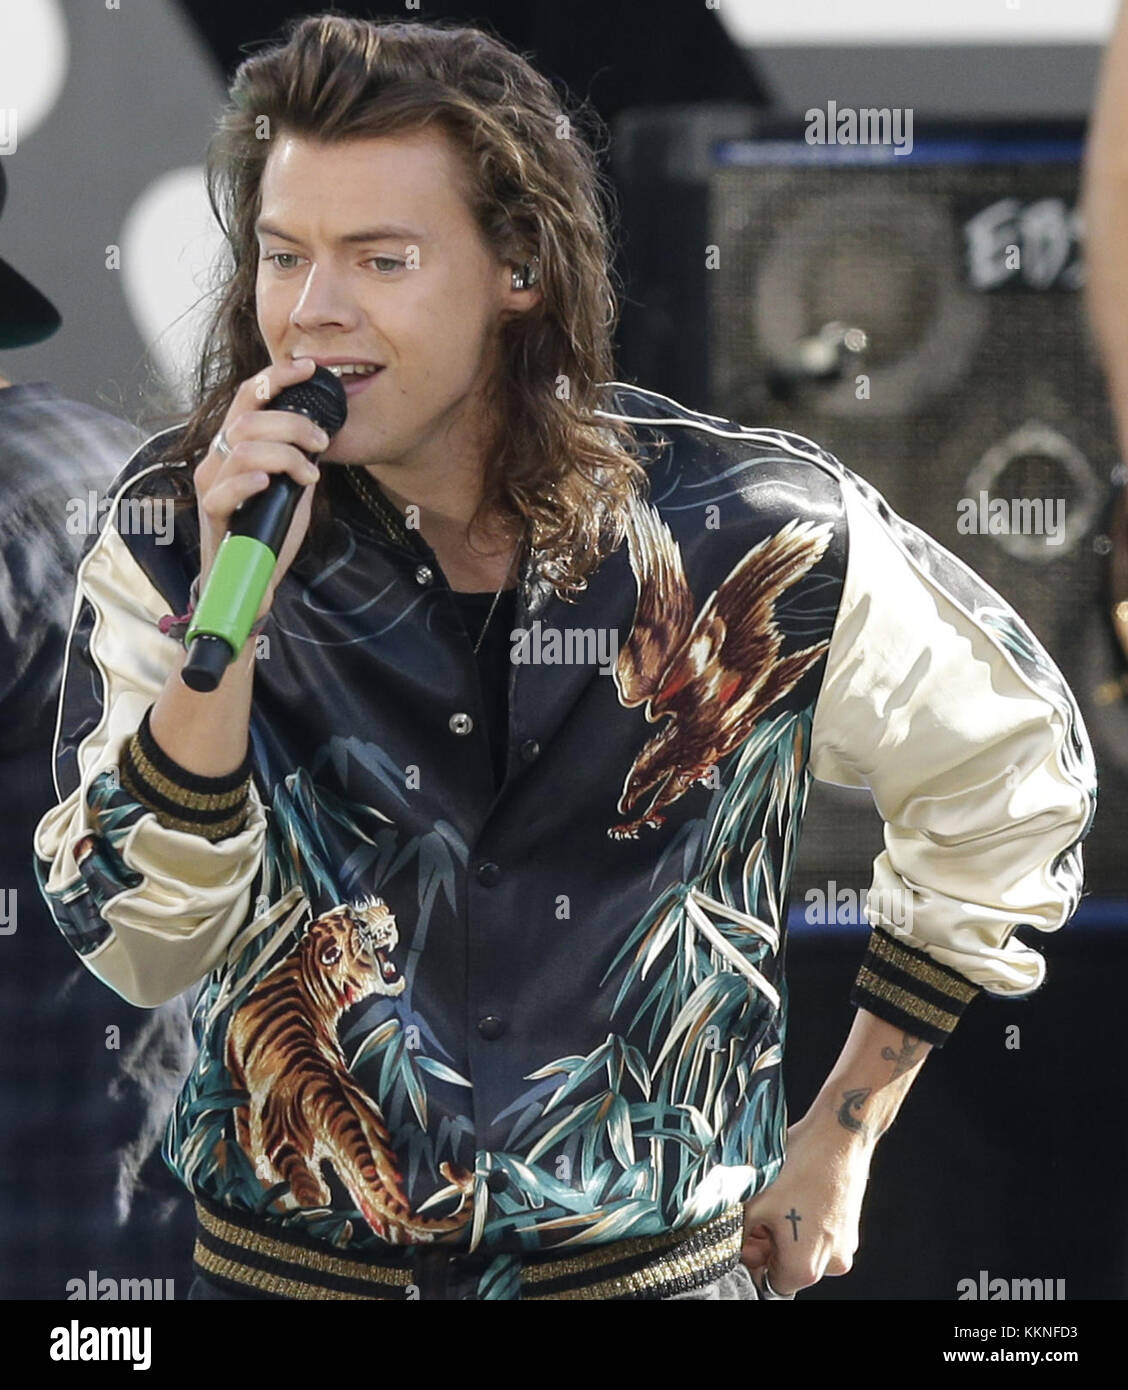 NEW YORK, NY - AUGUST 04: Harry Styles, Liam Payne, Niall Horan and Louis  Tomlinson of One Direction pose onstage during ABC's 'Good Morning America'  at Rumsey Playfield, Central Park on August